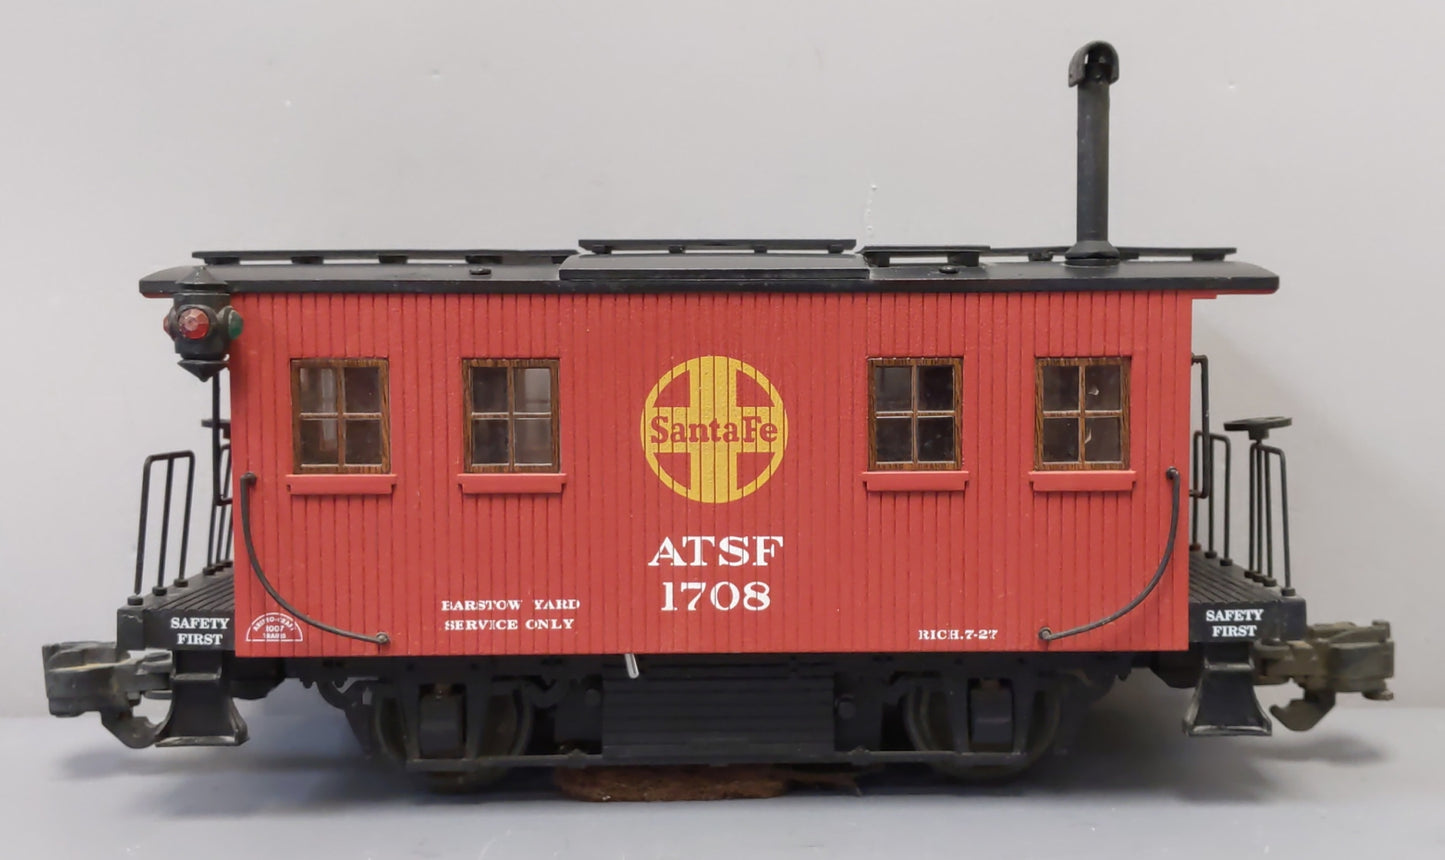 Aristo-Craft 46954 G Scale Track Cleaning Caboose VG/Box